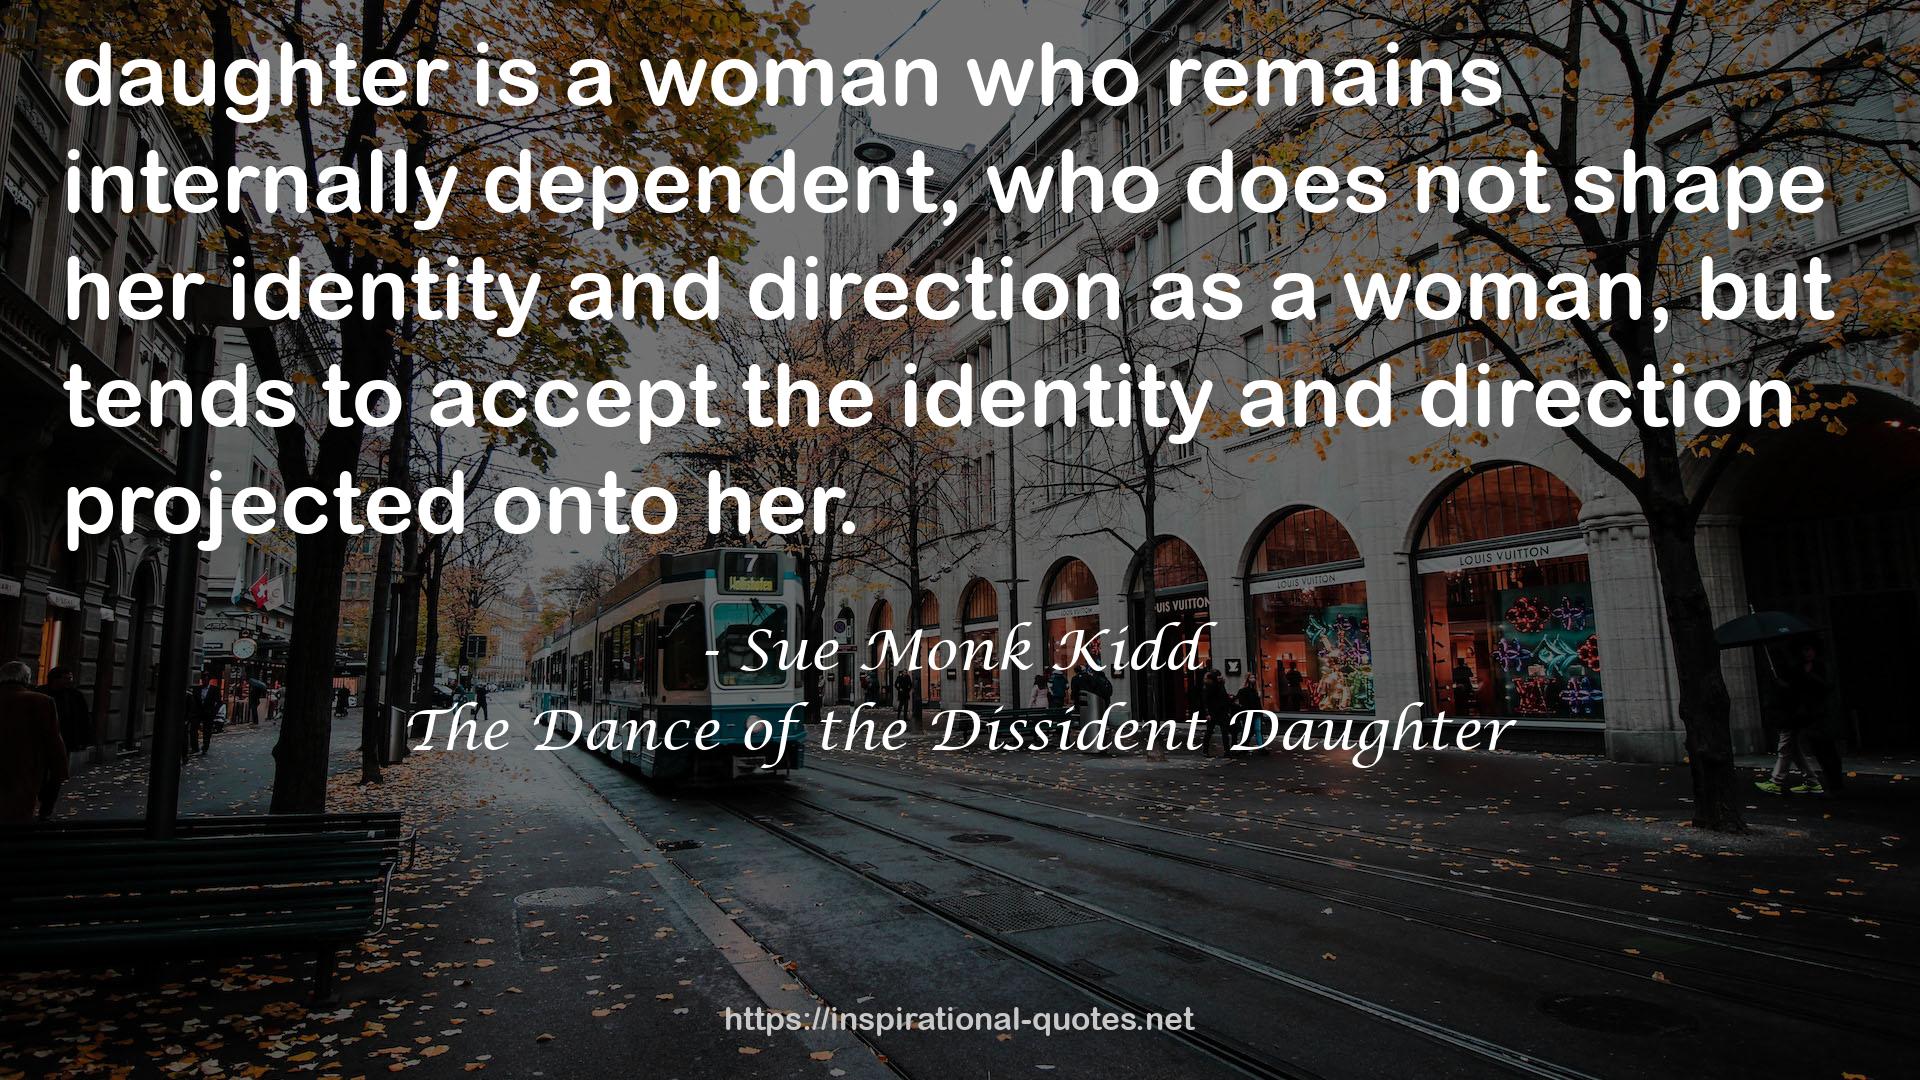 The Dance of the Dissident Daughter QUOTES